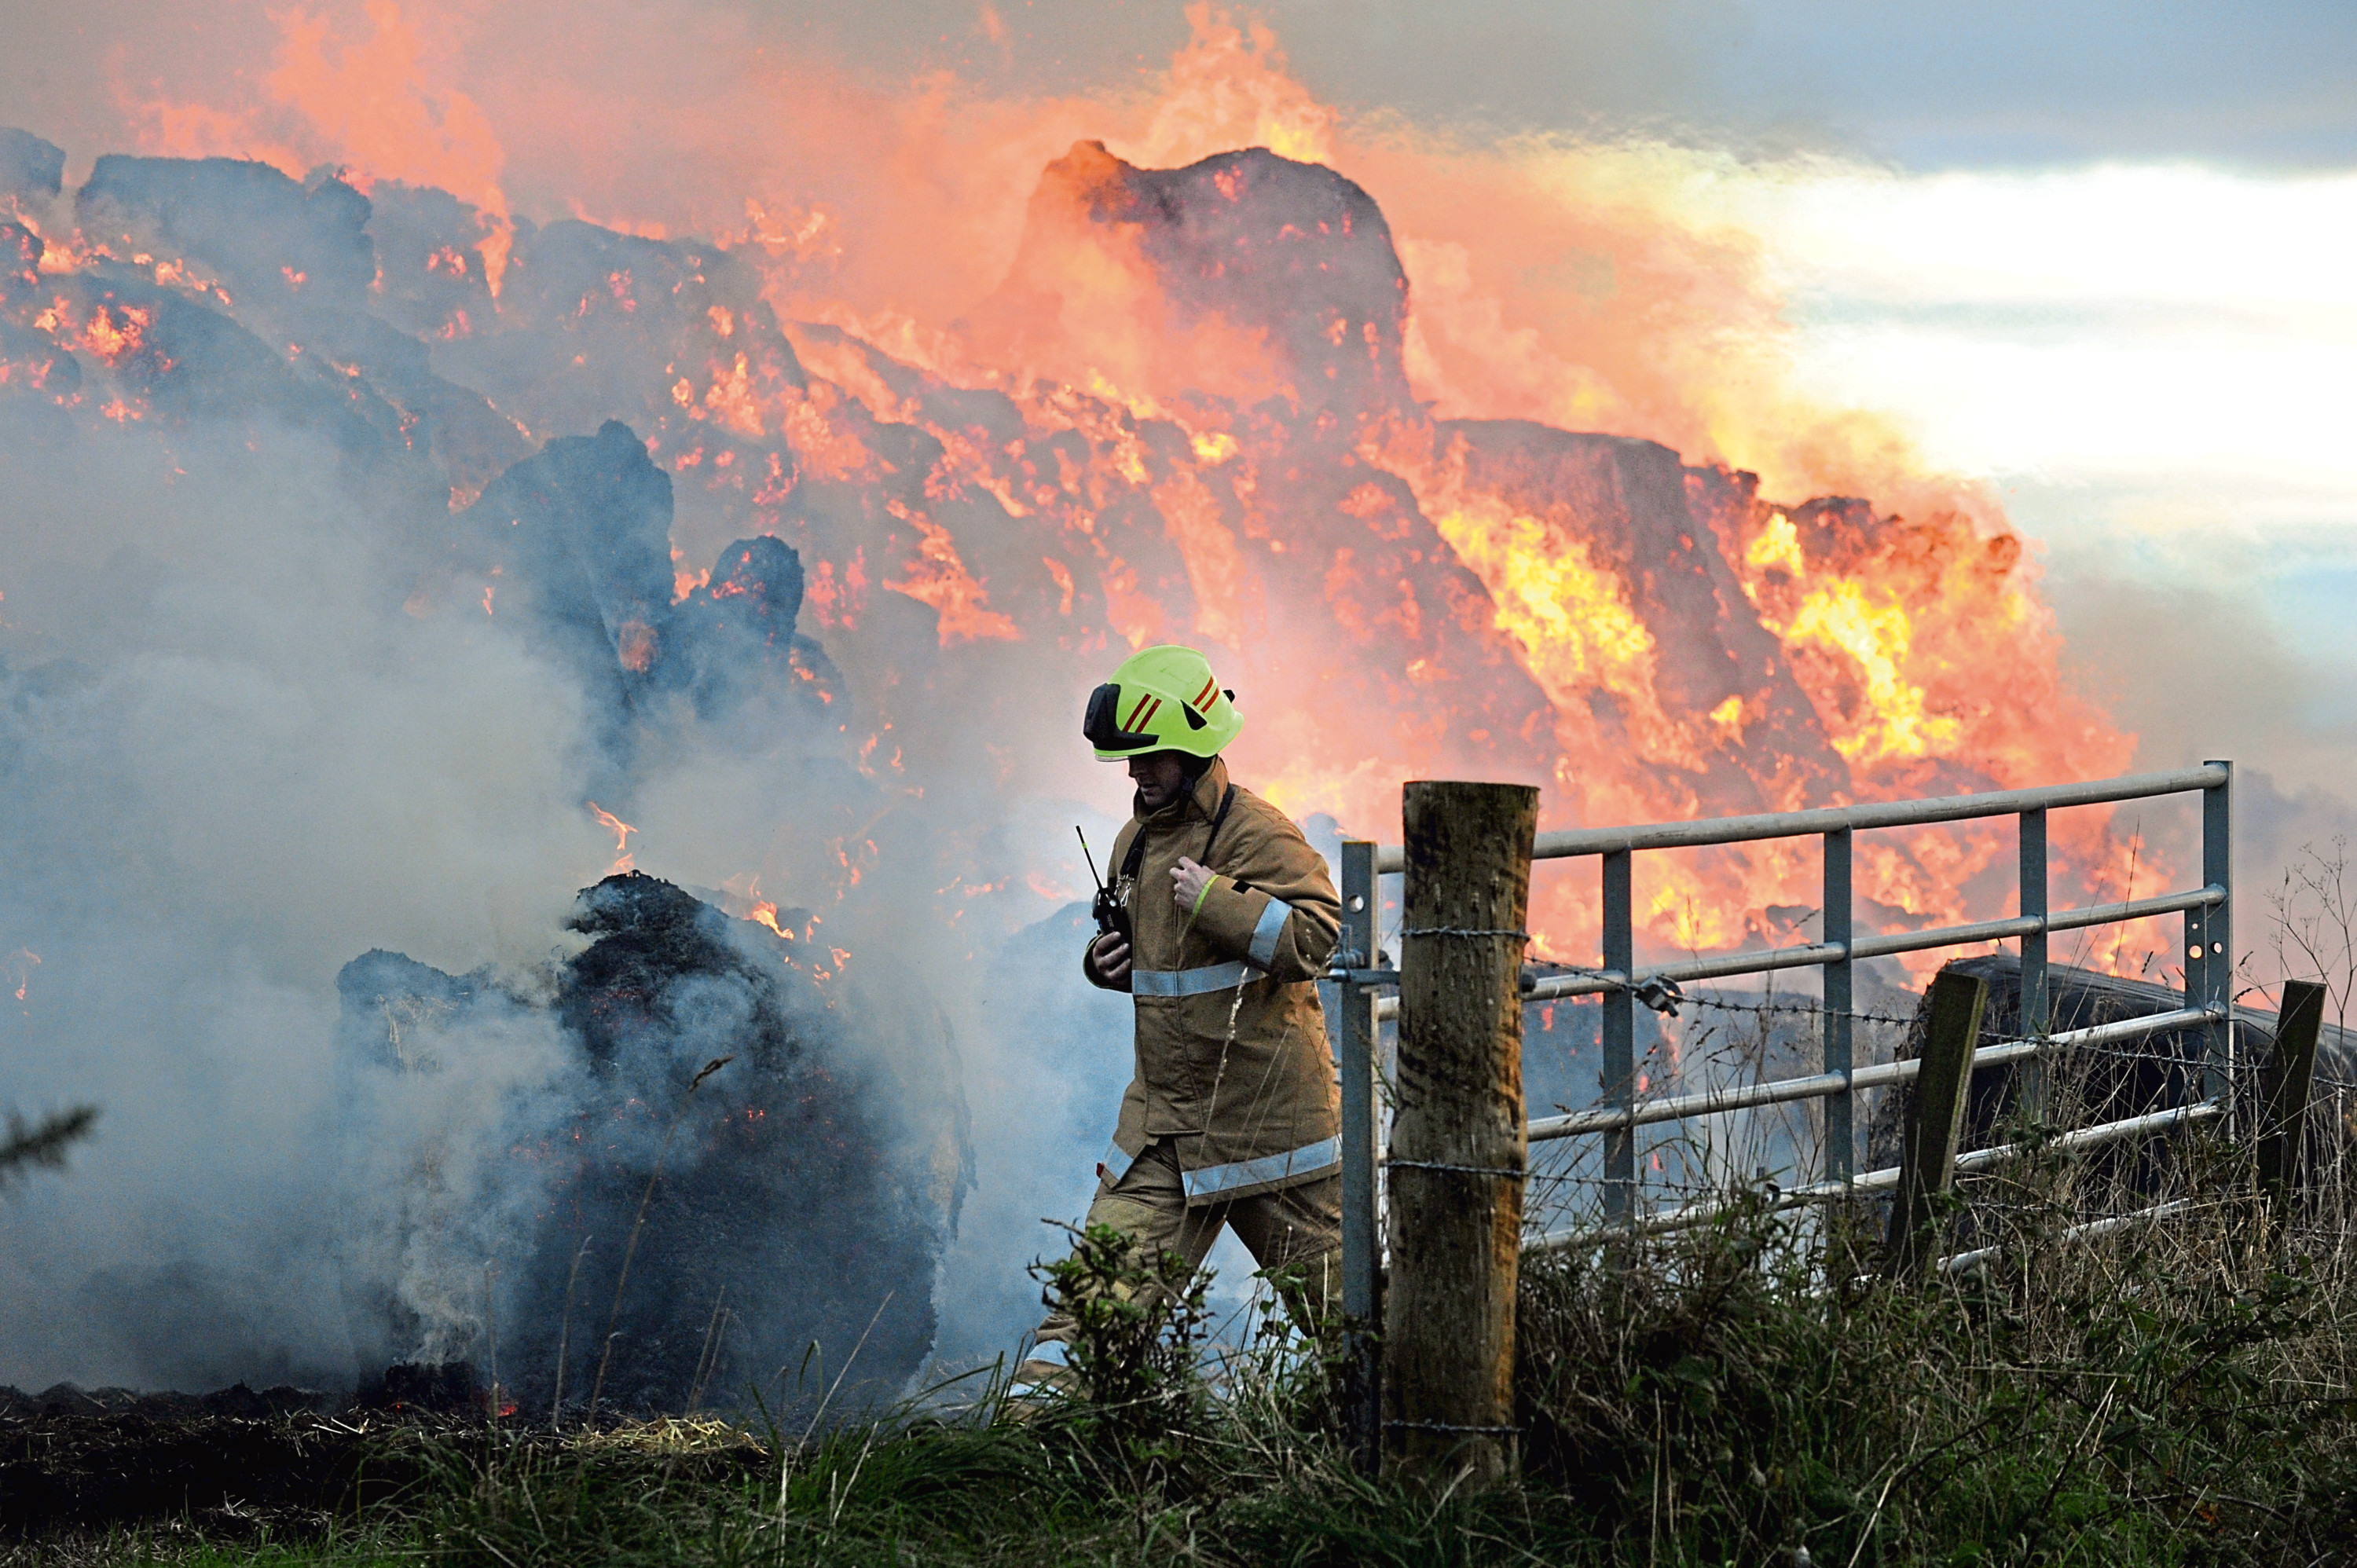 The cost of farm fires in Scotland almost doubled last year to £7.6m.